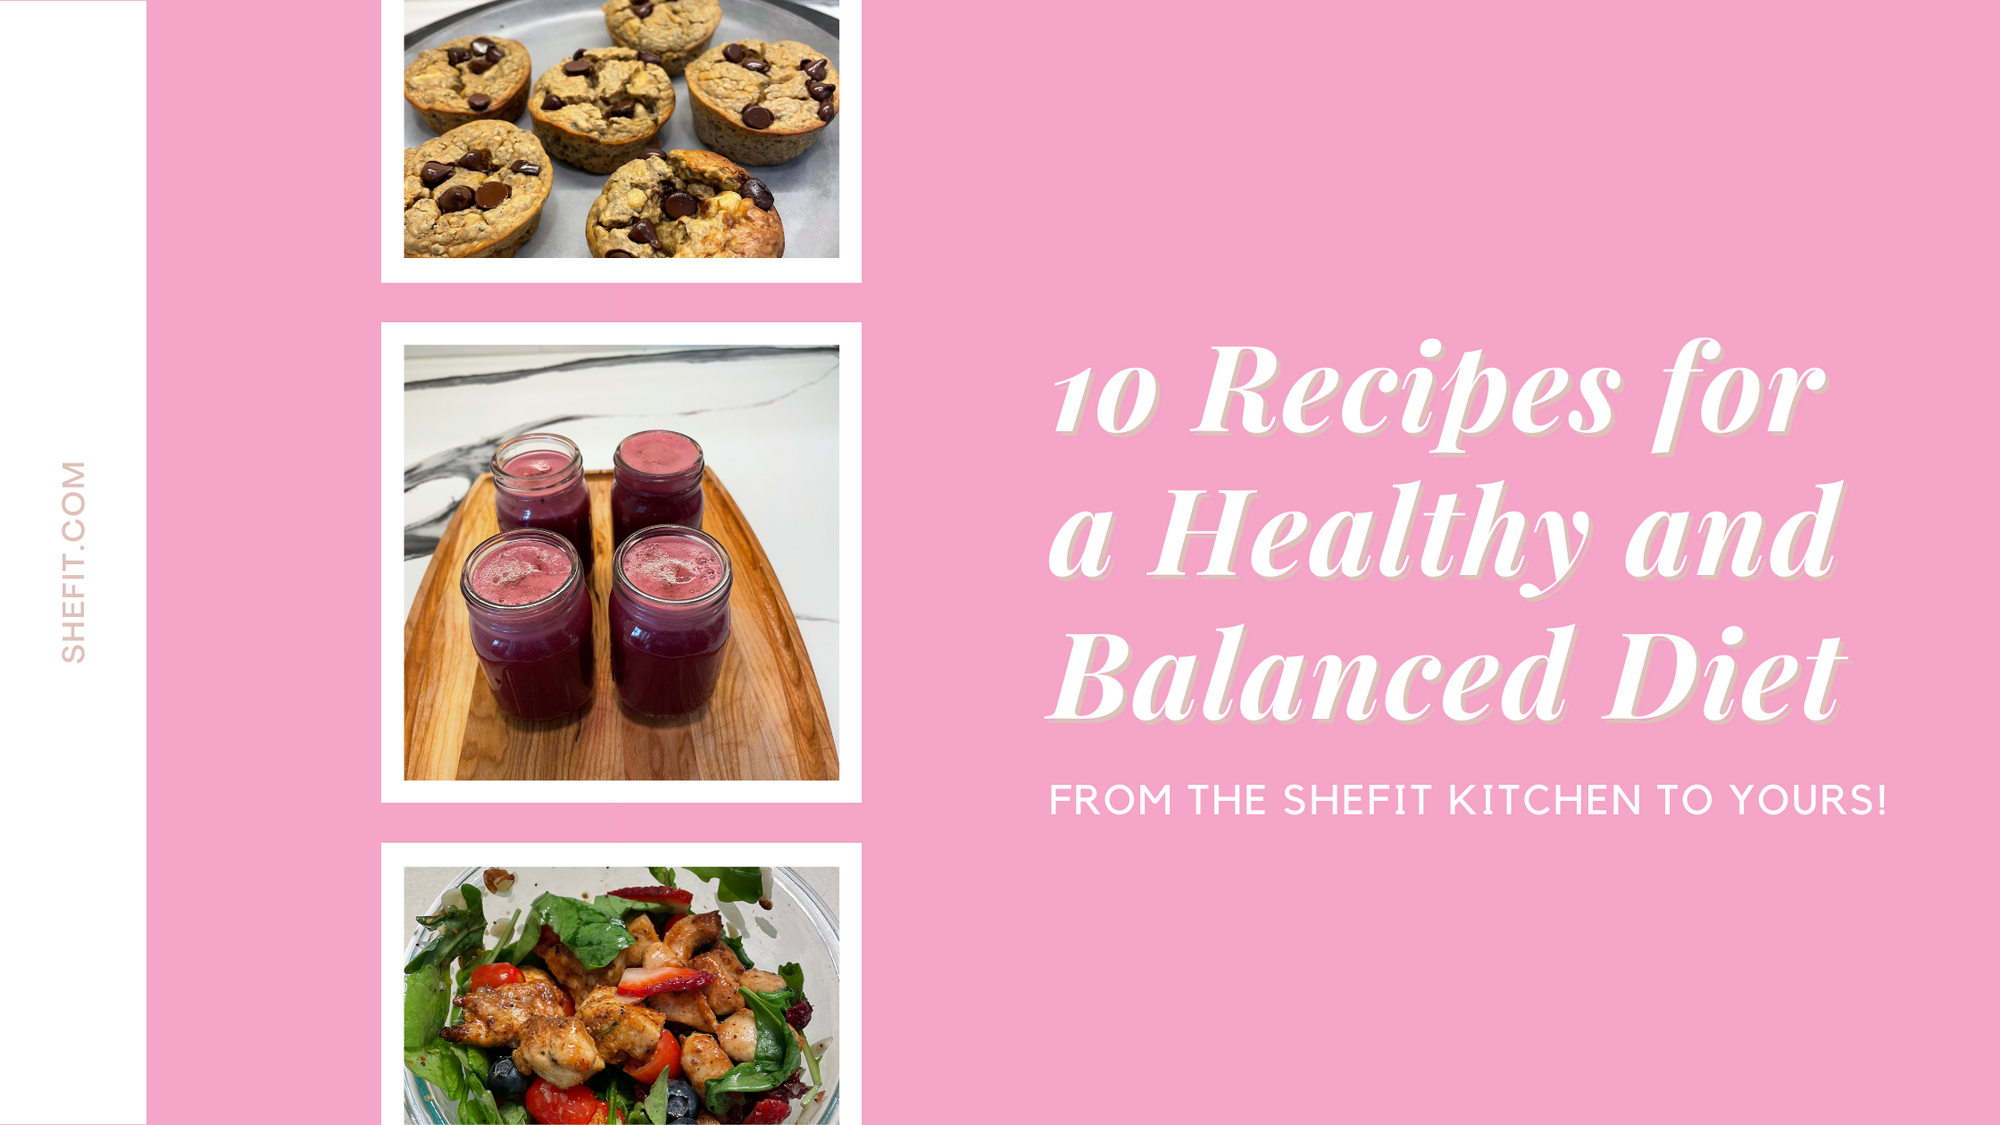 10 Recipes for a Healthy and Balanced Diet